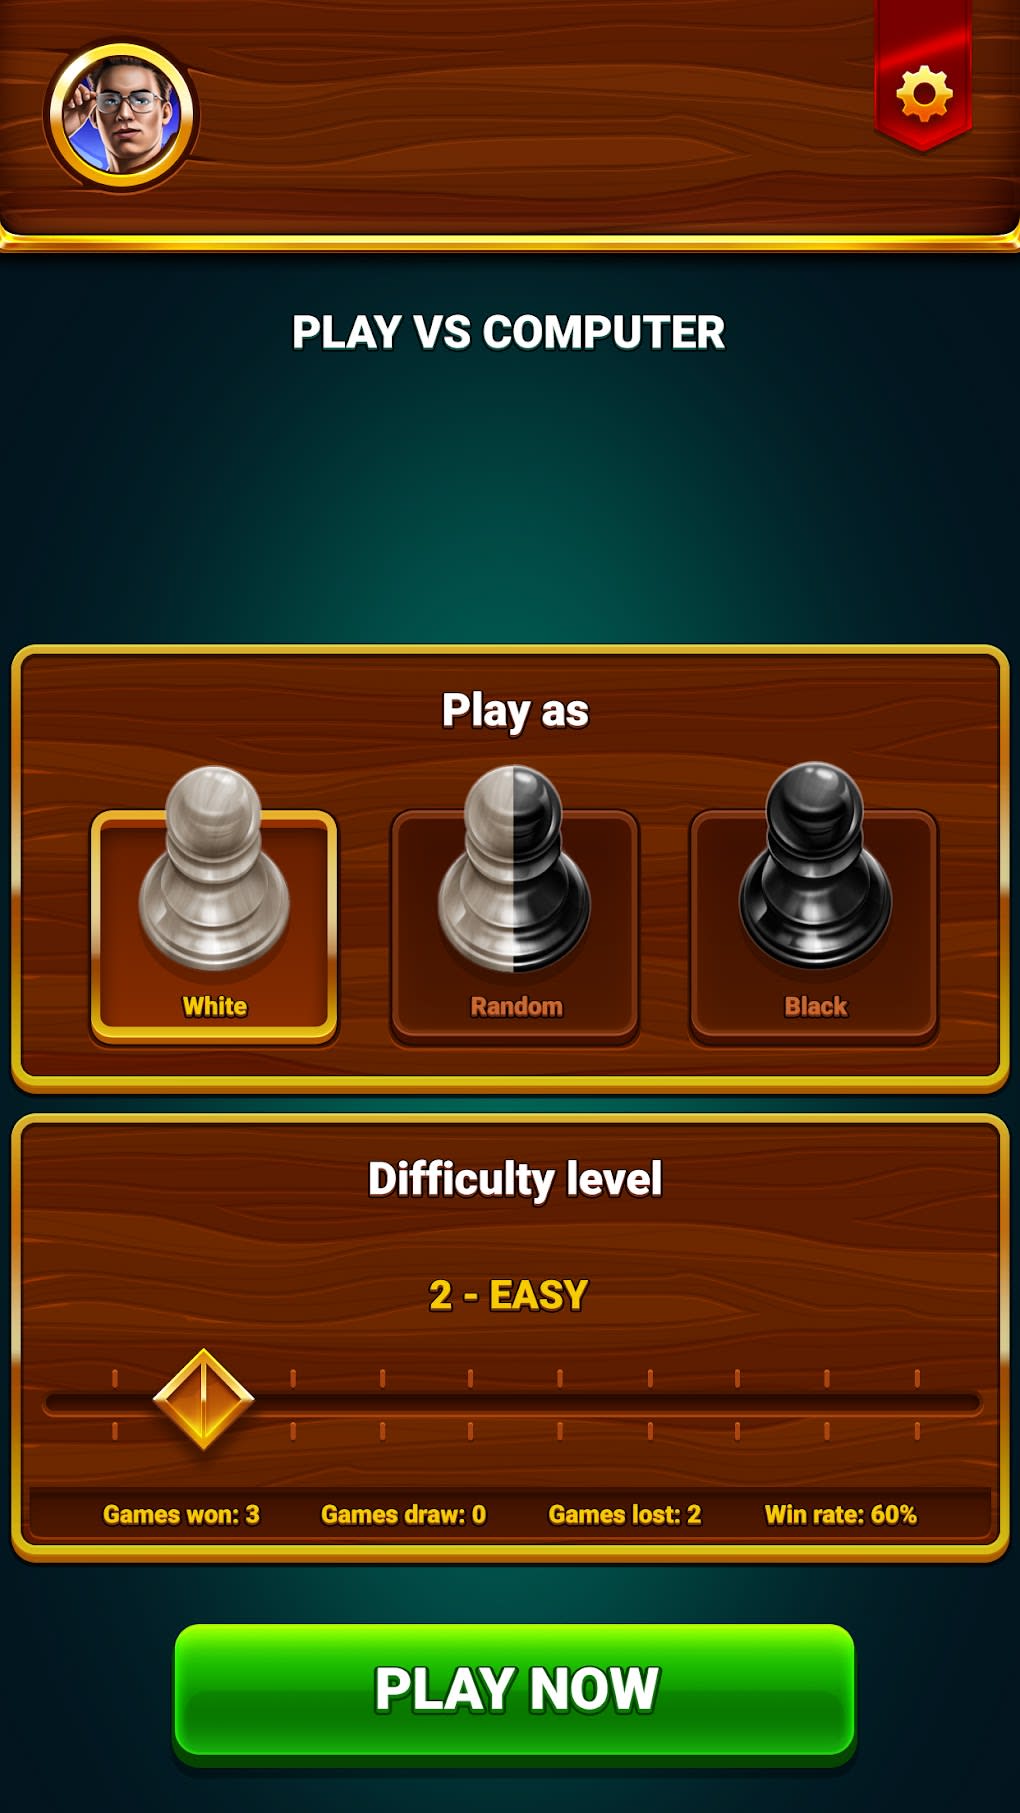 Chess - Offline Board Game for Android - Free App Download